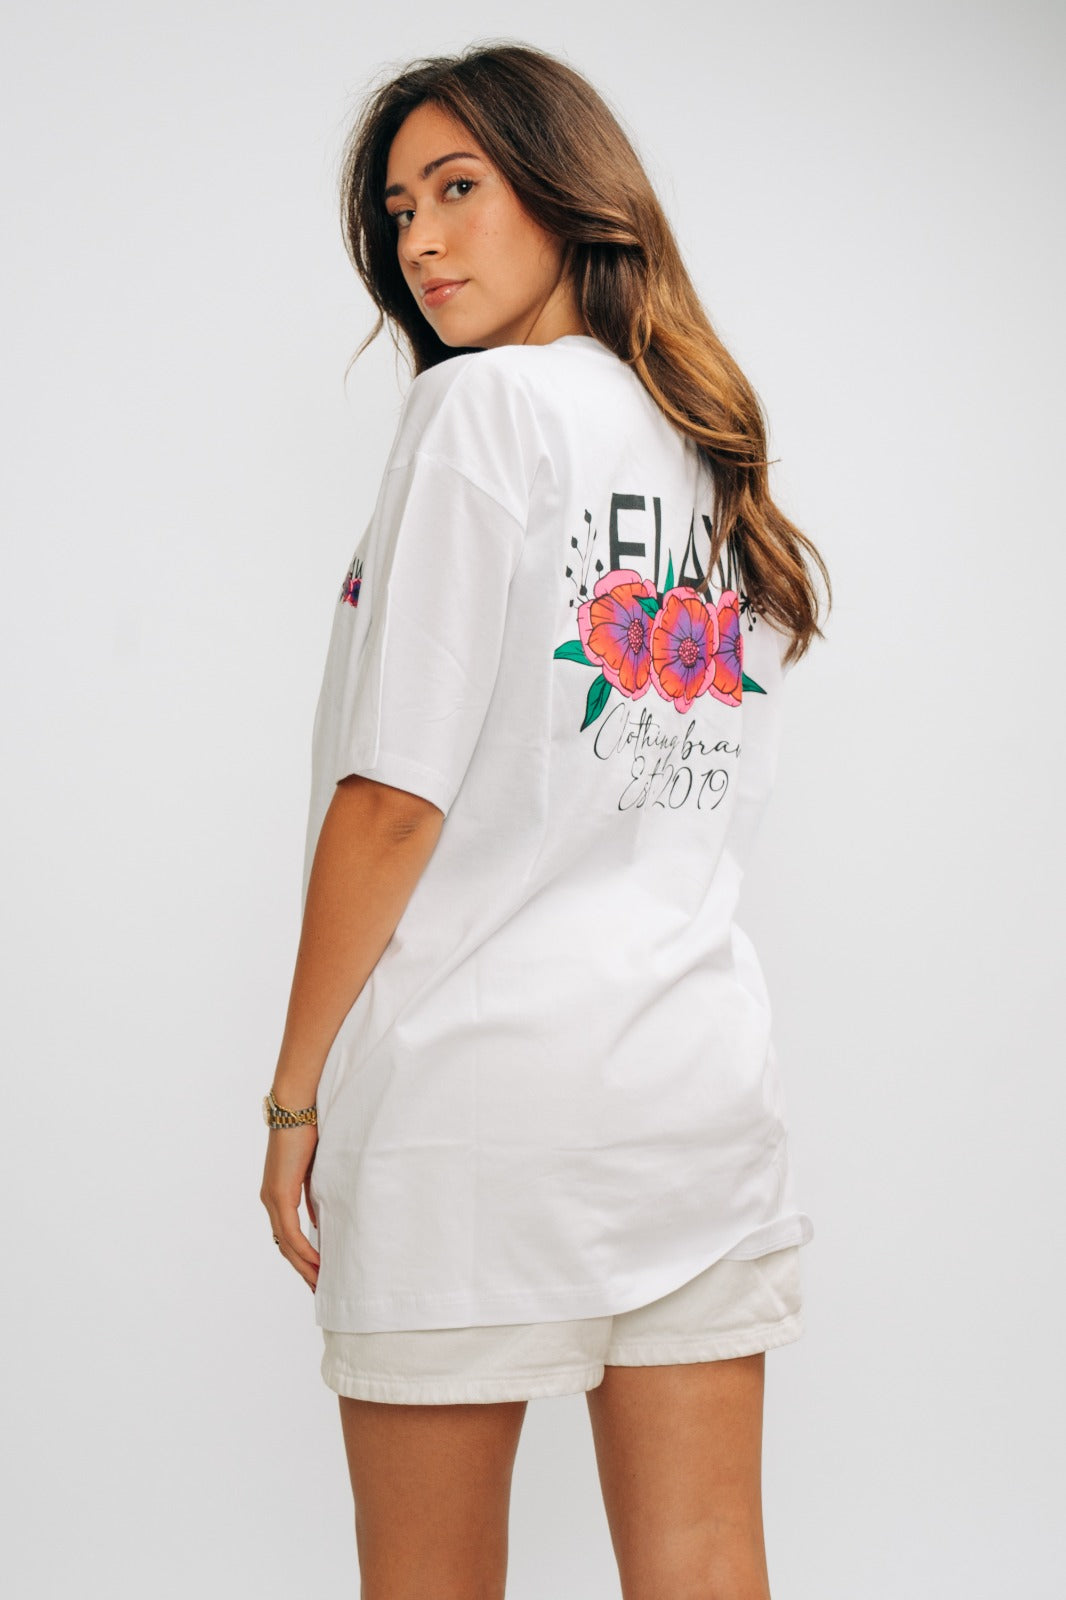 Flaw Flowers T-Shirt White